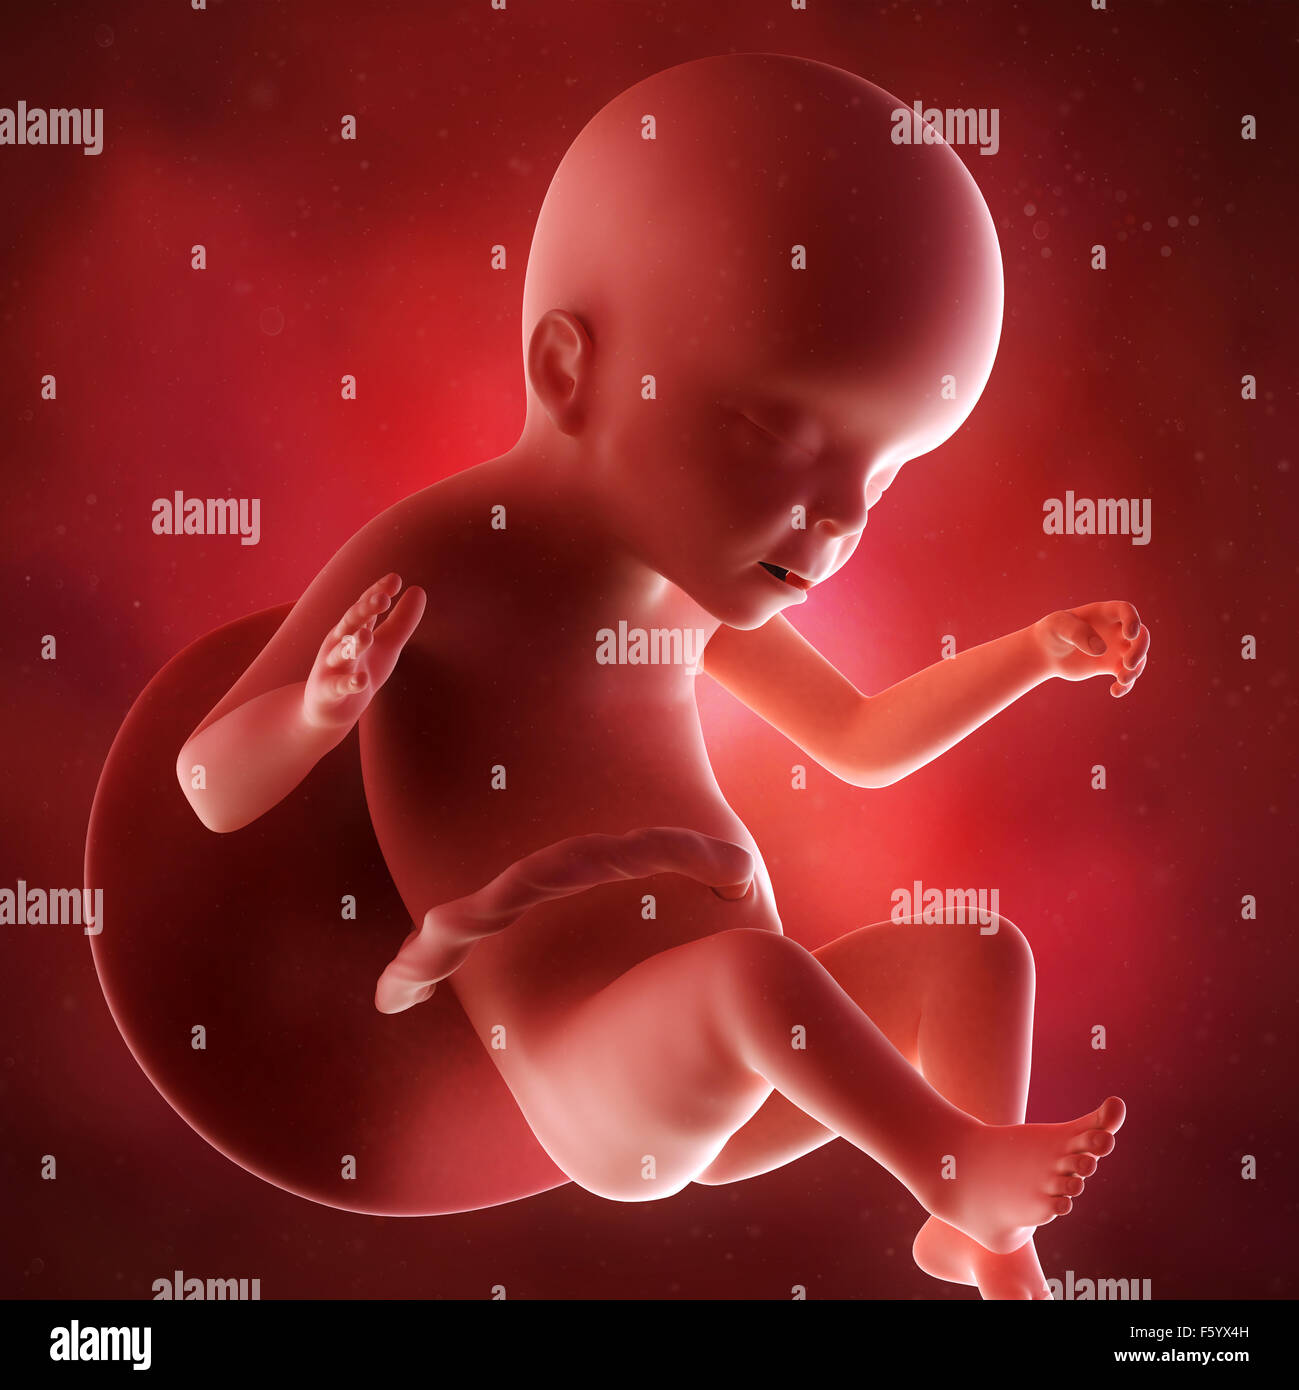 medical accurate 3d illustration of a fetus week 23 Stock Photo